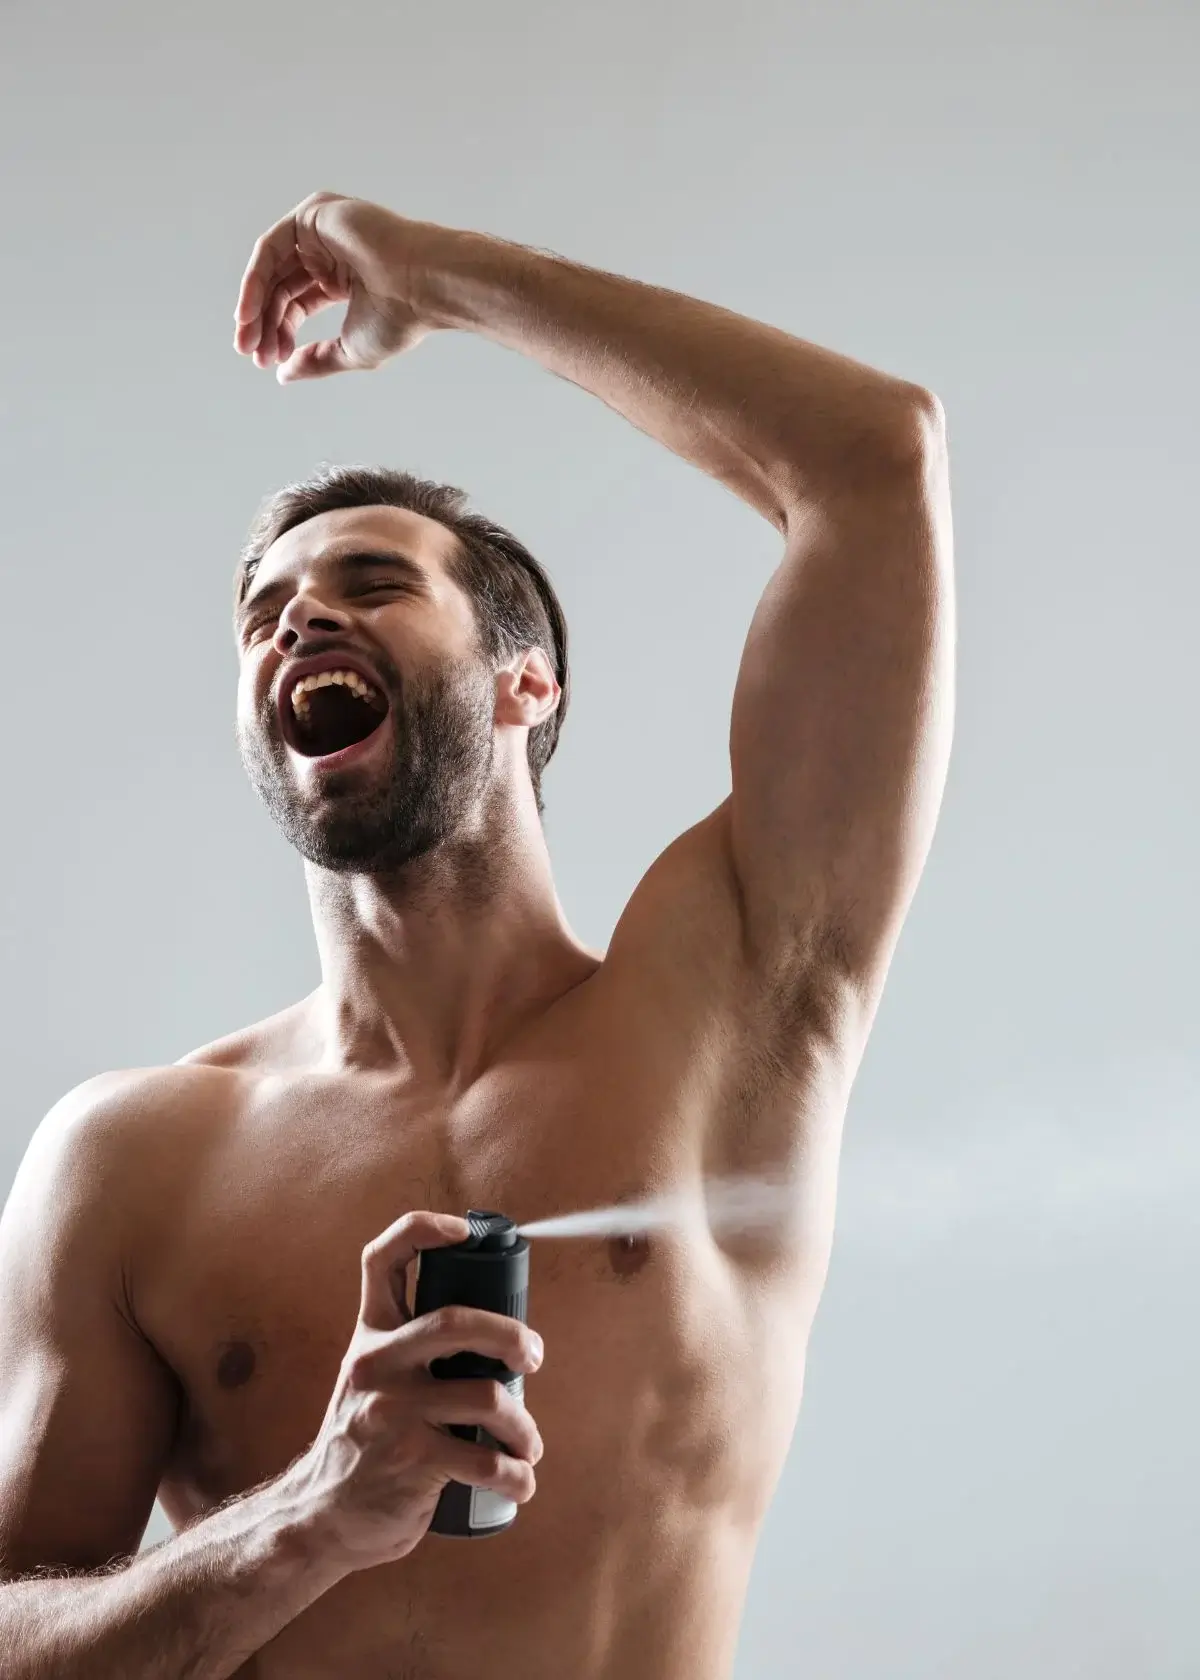 How do aluminum-free deodorants work to control body odor and keep underarms fresh?